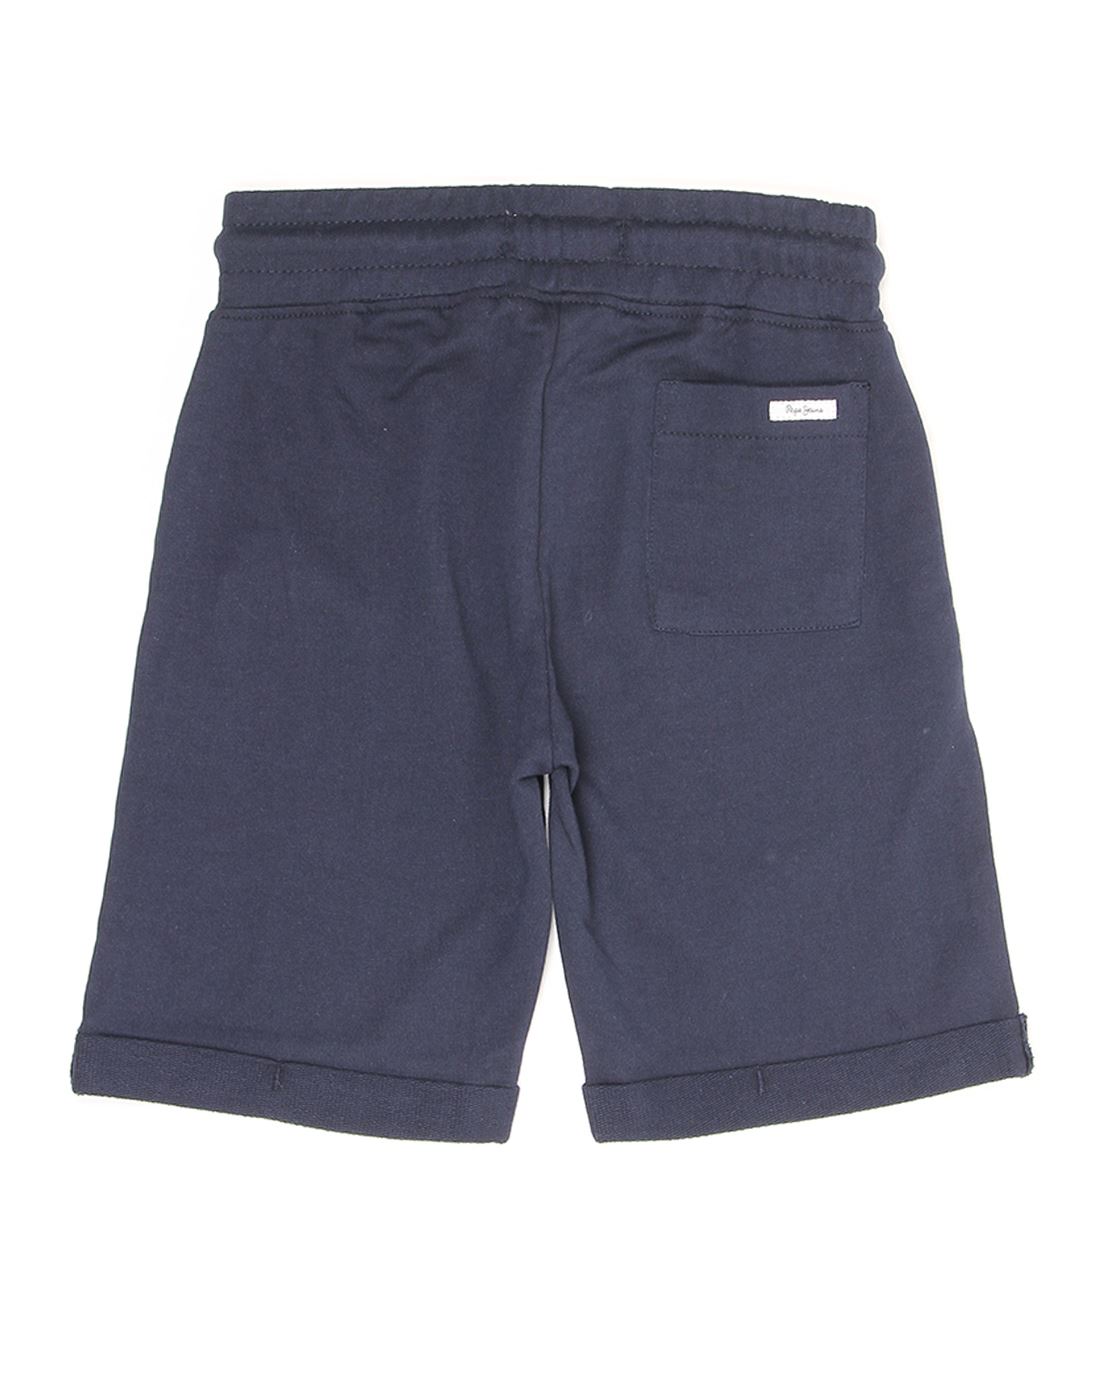 Pepe Kids Casual Wear Navy Shorts For Boys